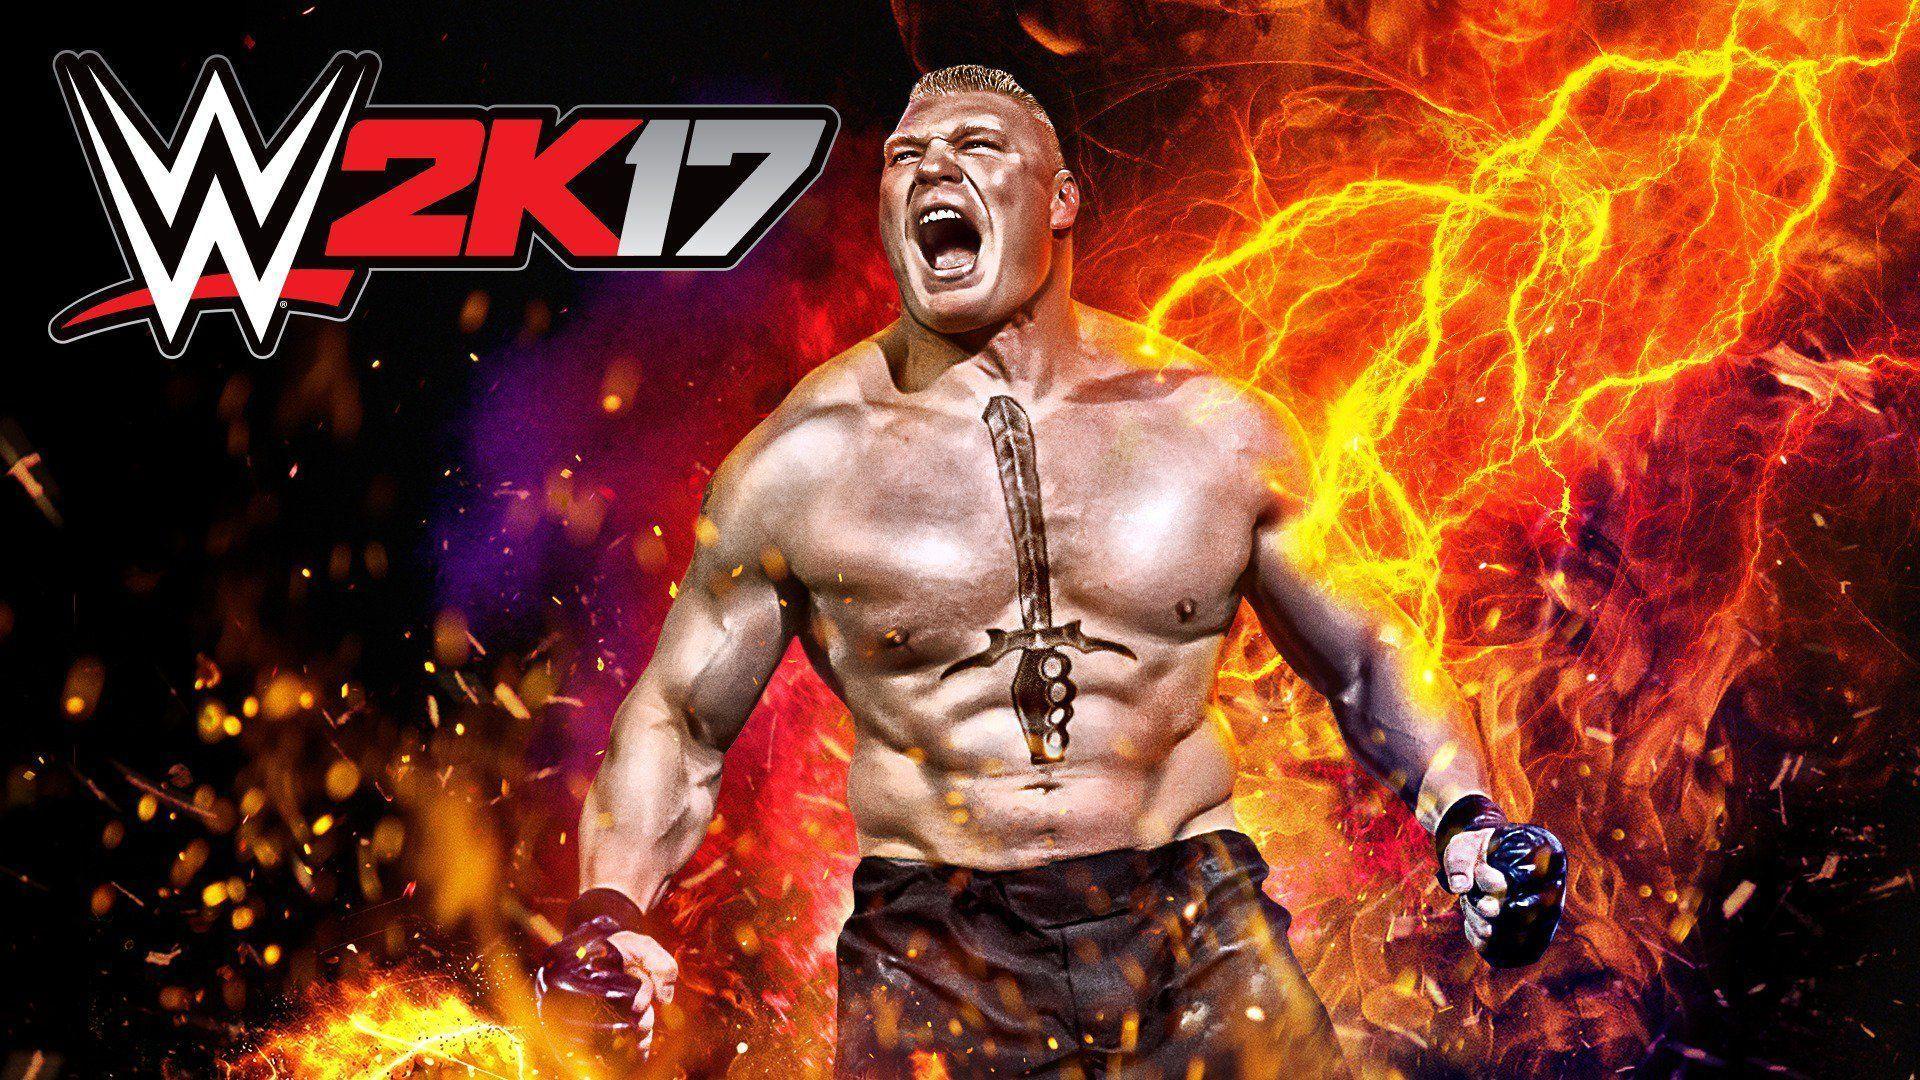 Brock Lesnar&;s big year continues as he&;s featured on the WWE 2K17